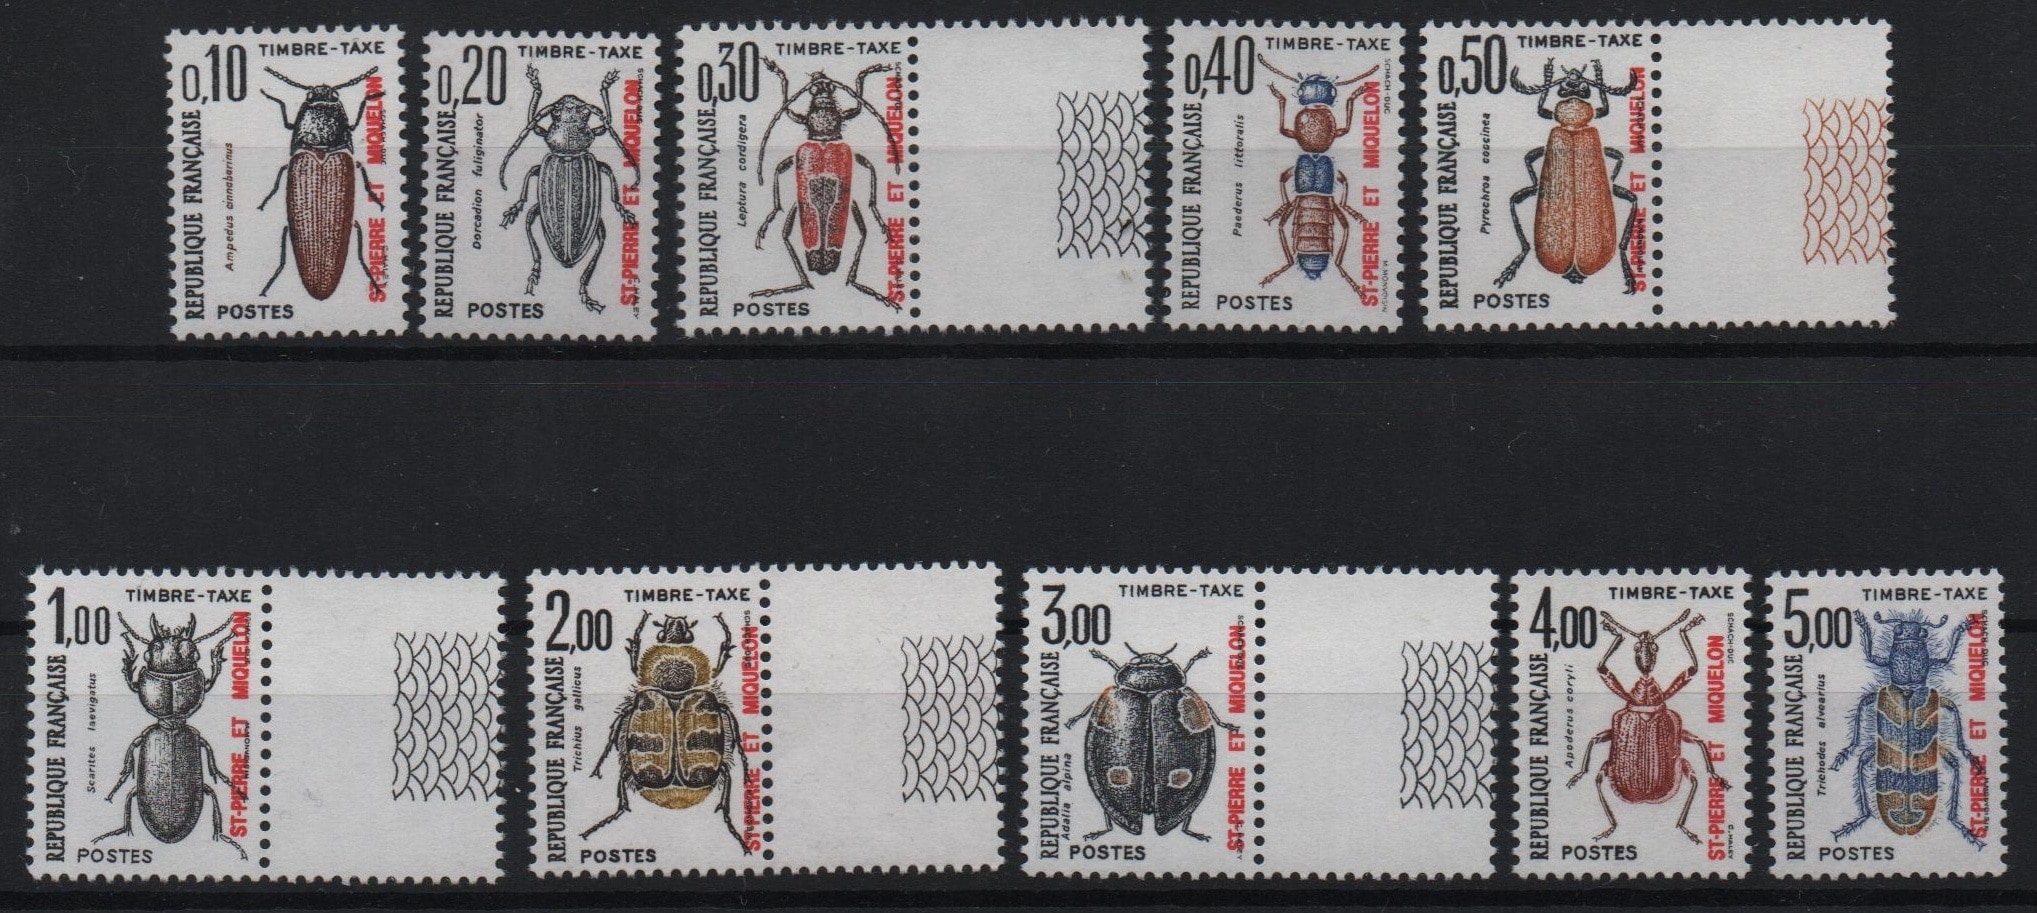 8 insect postage stamps